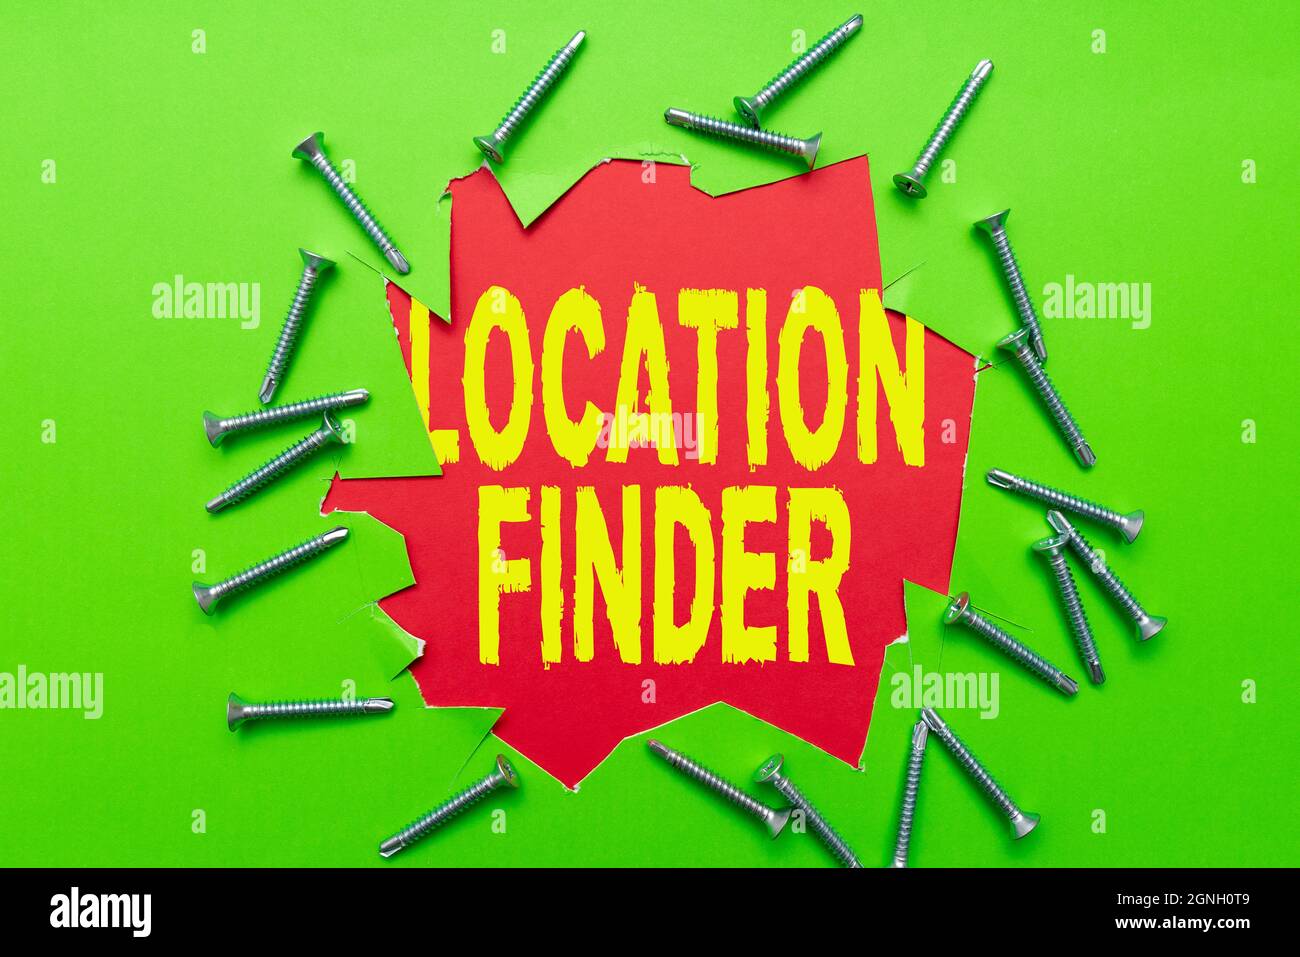 Text caption presenting Location Finder. Concept meaning A service featured to find the address of a selected place Workshop Improvement Ideas Stock Photo